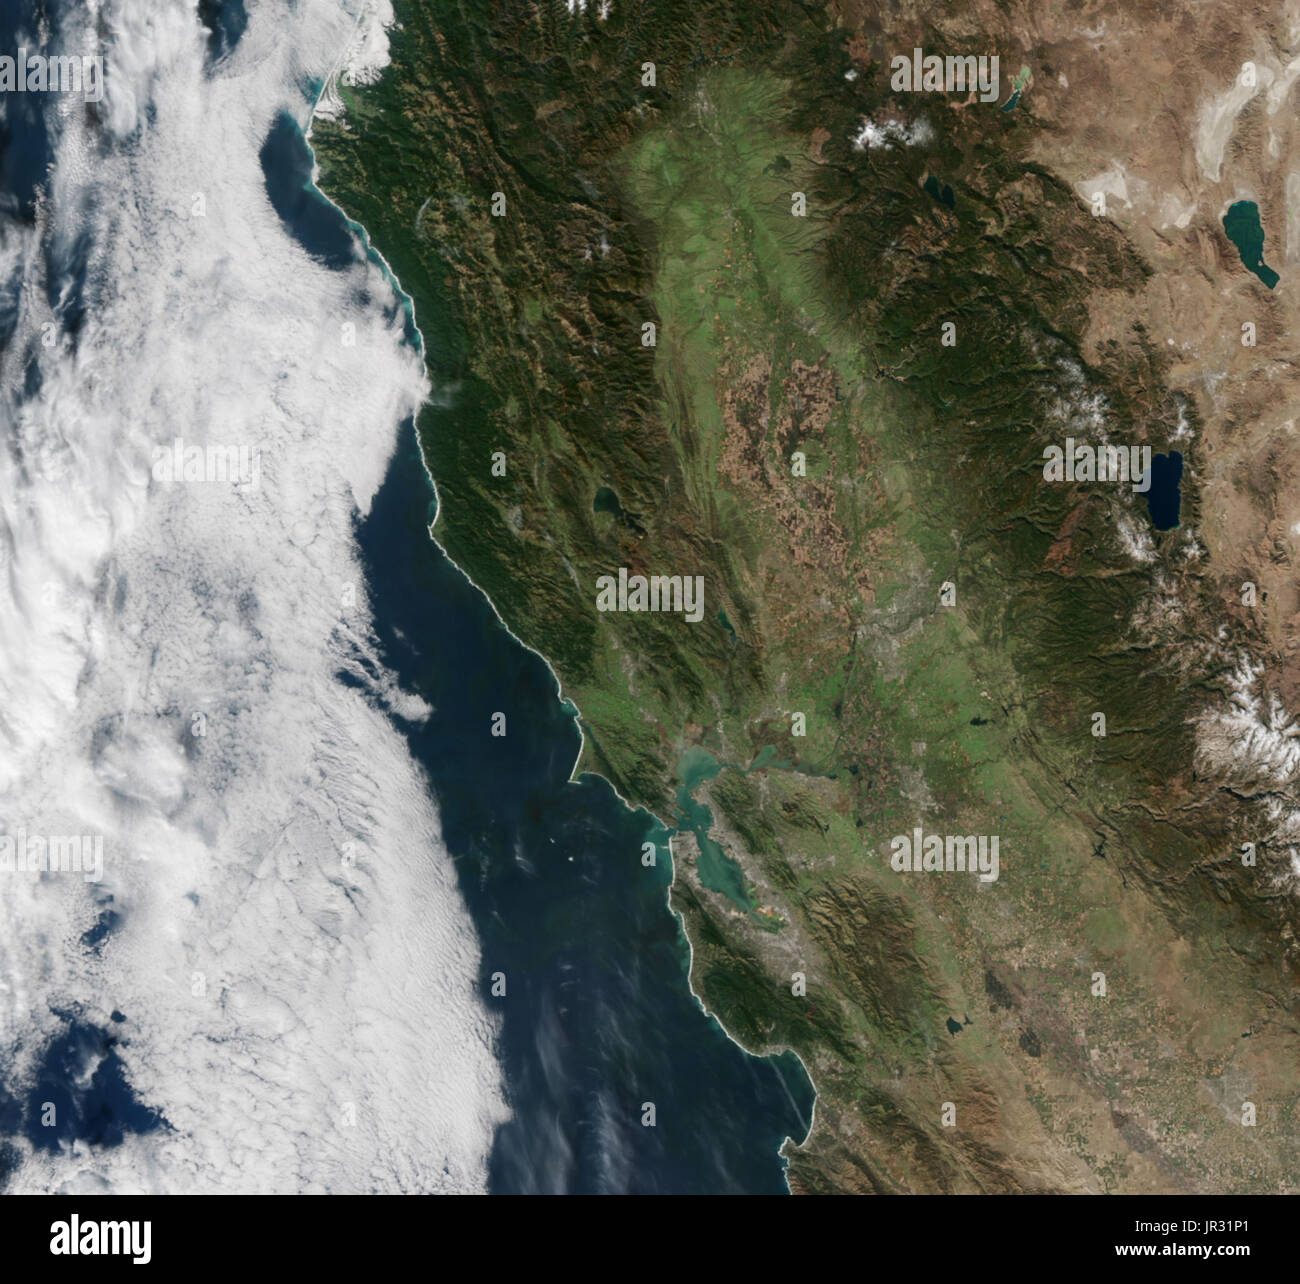 California coast on November 9, 2016, after years of drought, as seen by the Visible Infrared Imaging Radiometer Suite (VIIRS) on the Suomi NPP satellite. Compare with JG5744, taken in February, 2017, after a series of winter storms. Stock Photo